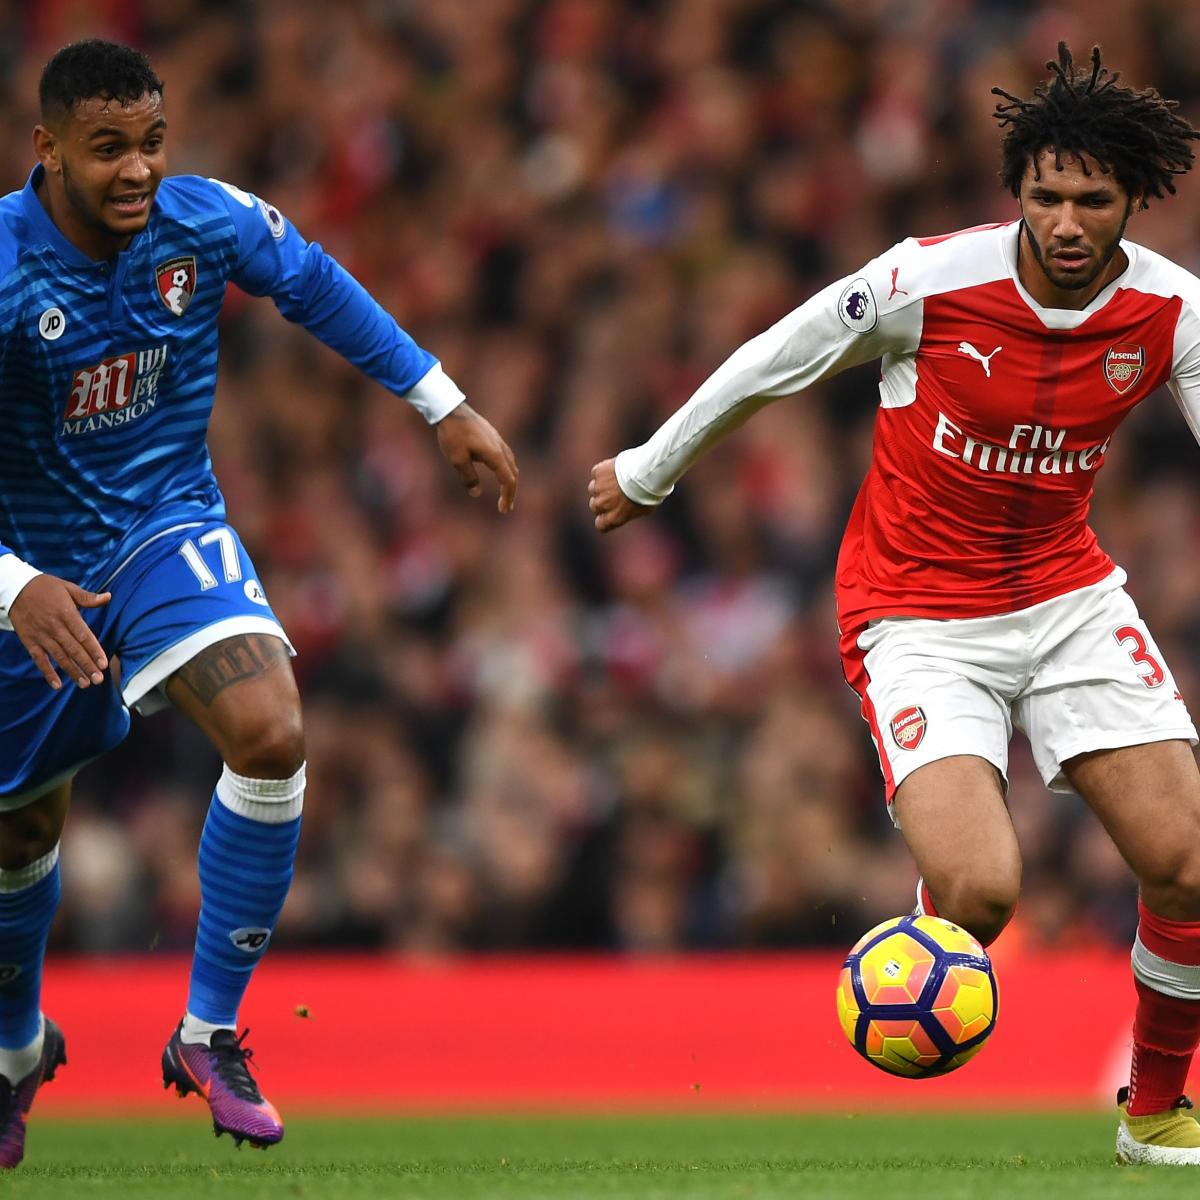 Arsenal vs. Bournemouth: Live Score, Highlights from Premier League